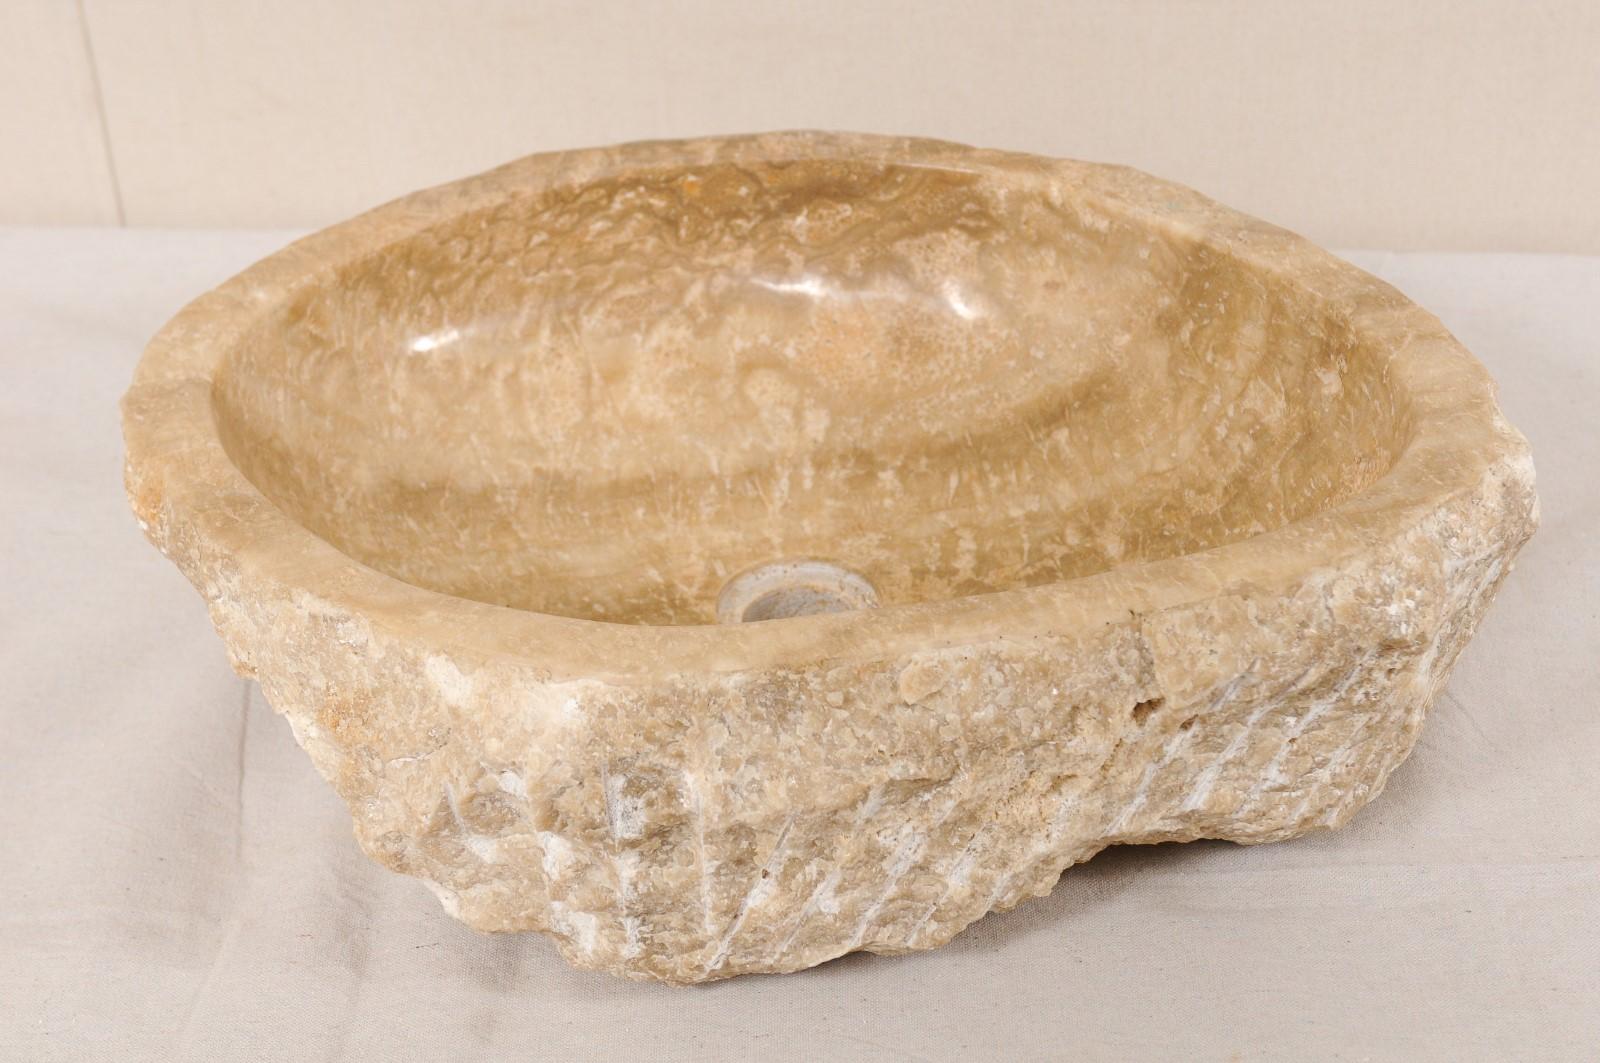 Beautiful Polished Onyx Rock Sink Basin in Neutral Cream and Brown Hues 1